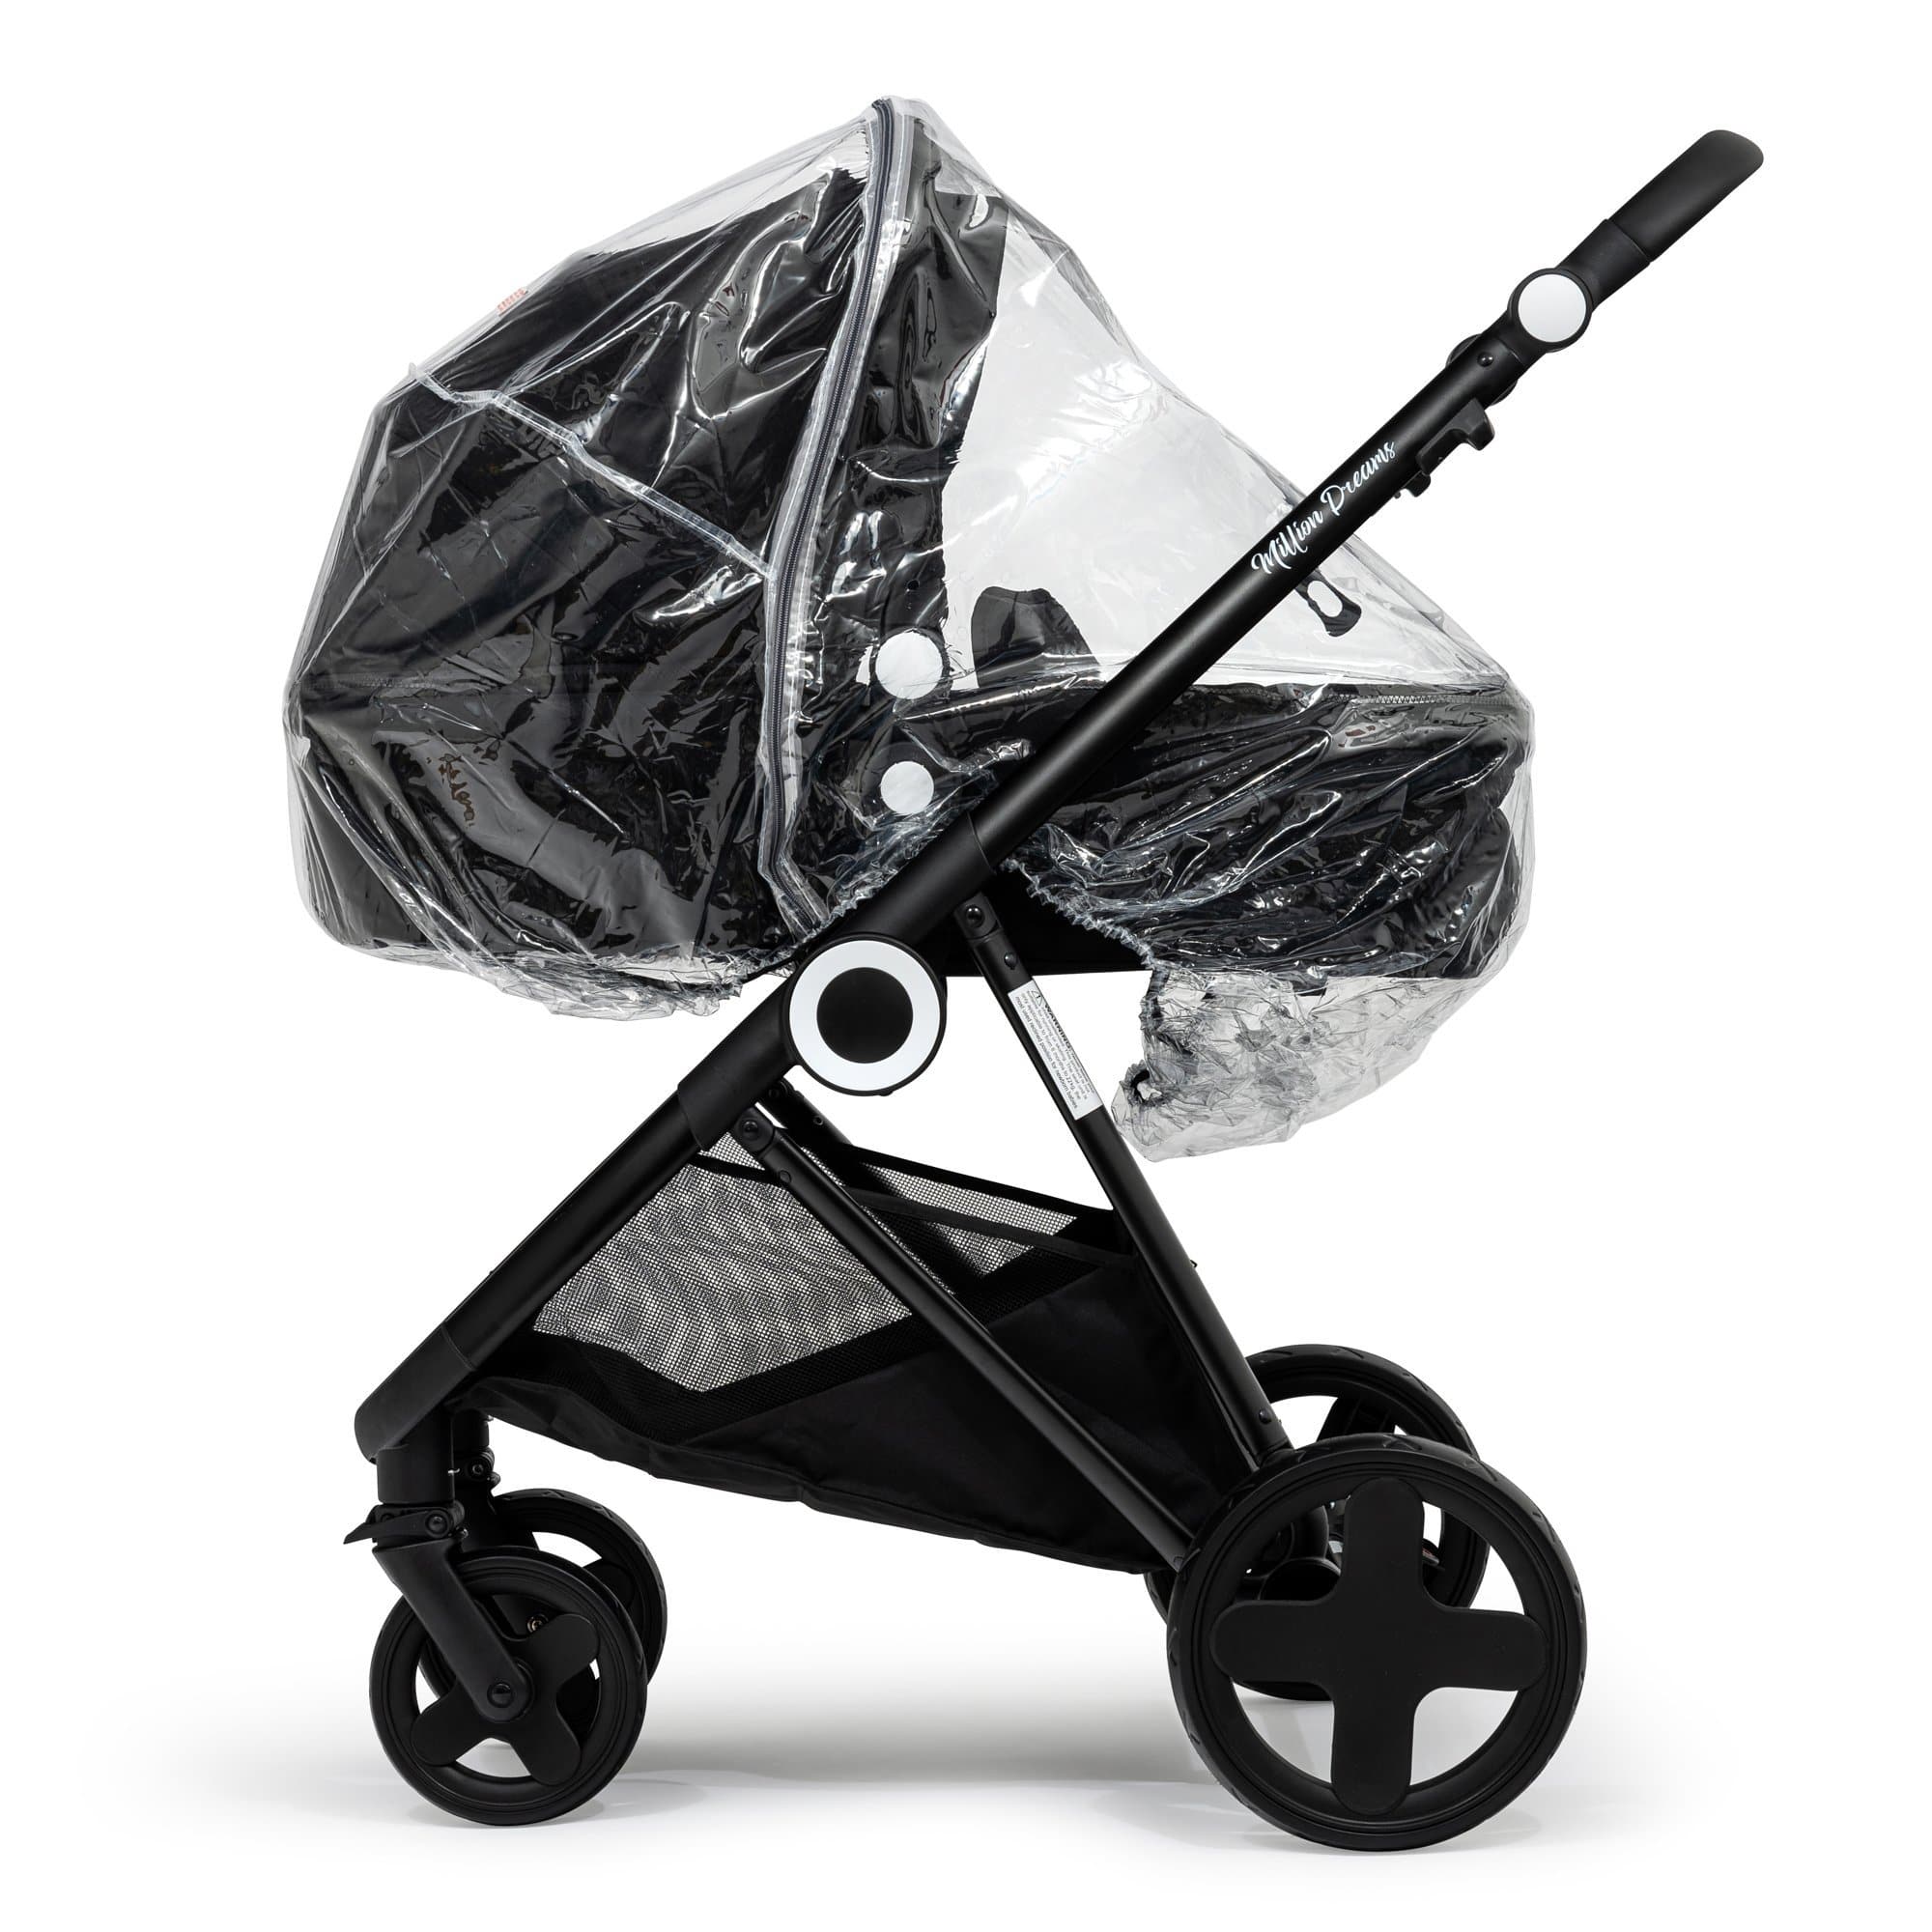 2 in 1 Rain Cover Compatible with Brio - Fits All Models - For Your Little One